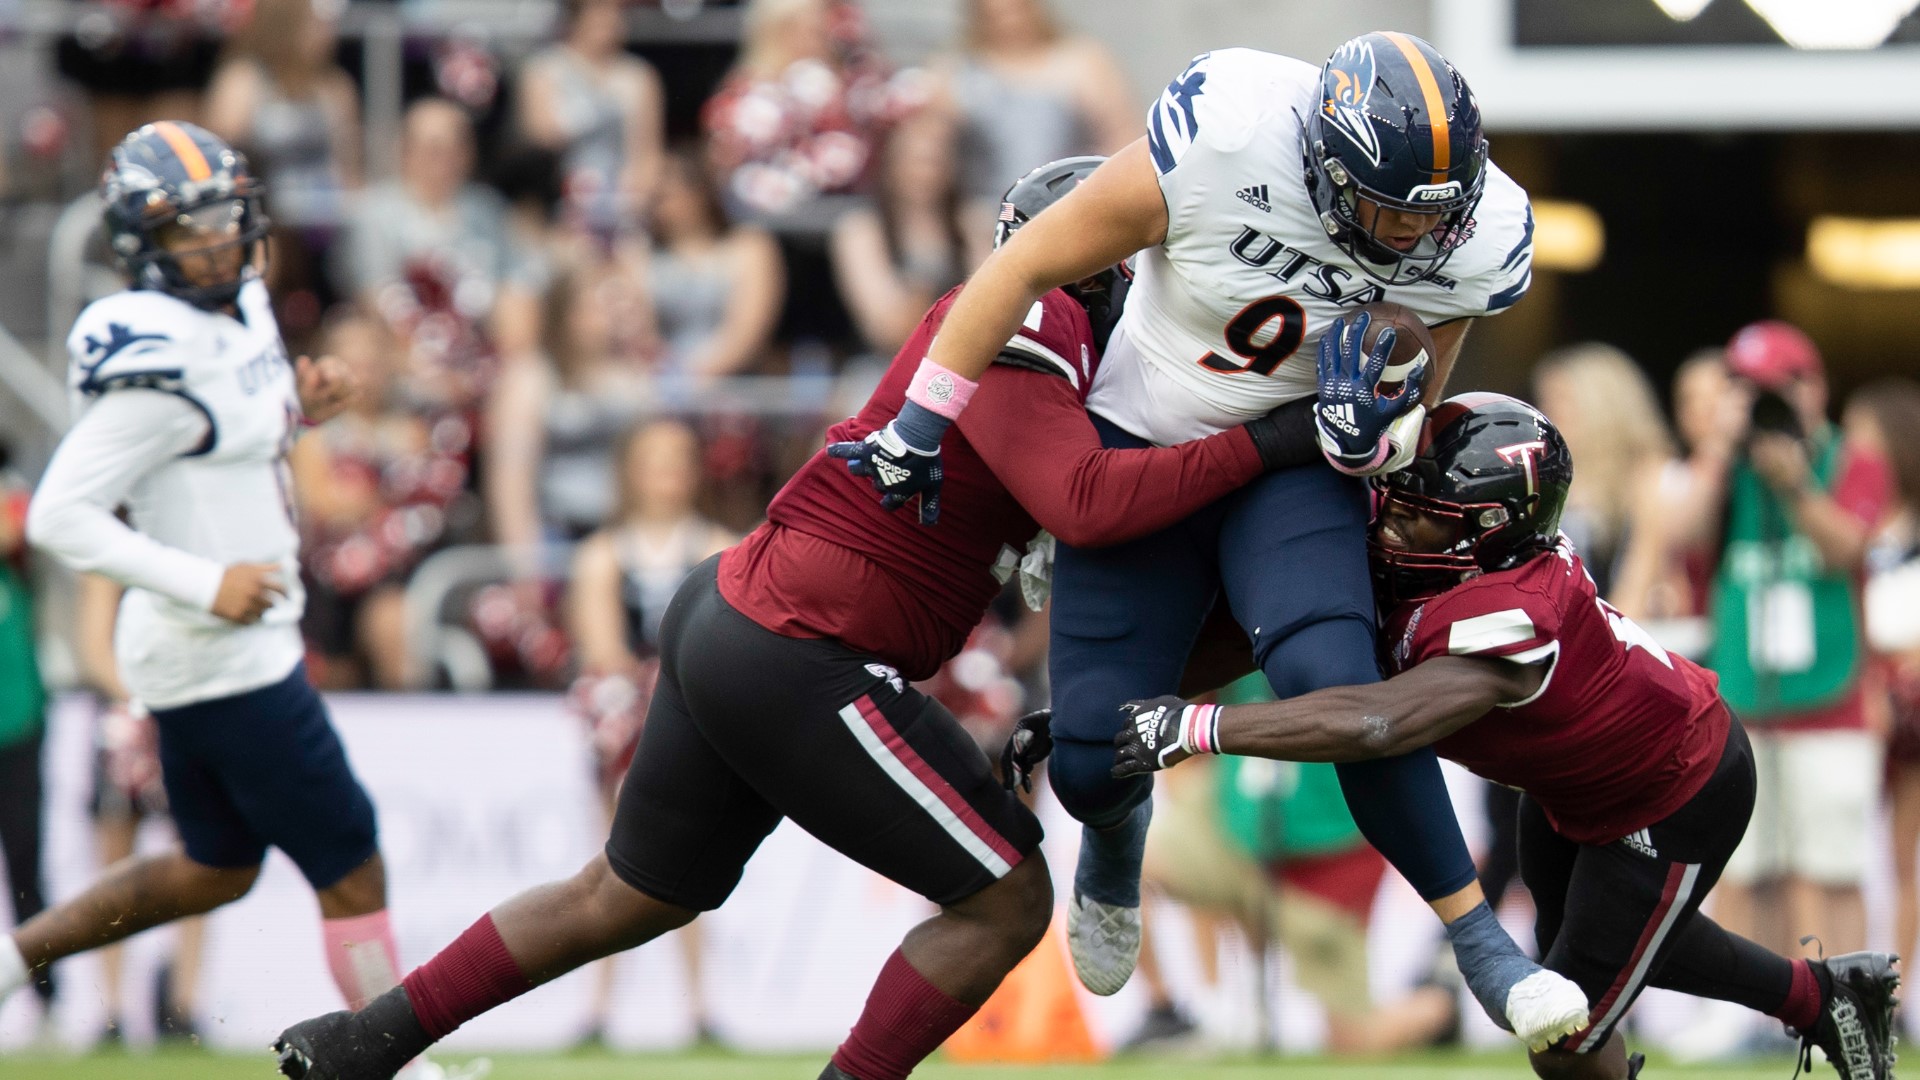 Turnovers and penalties proved costly for the Roadrunners, who are now 0-4 in bowl game appearances all-time.